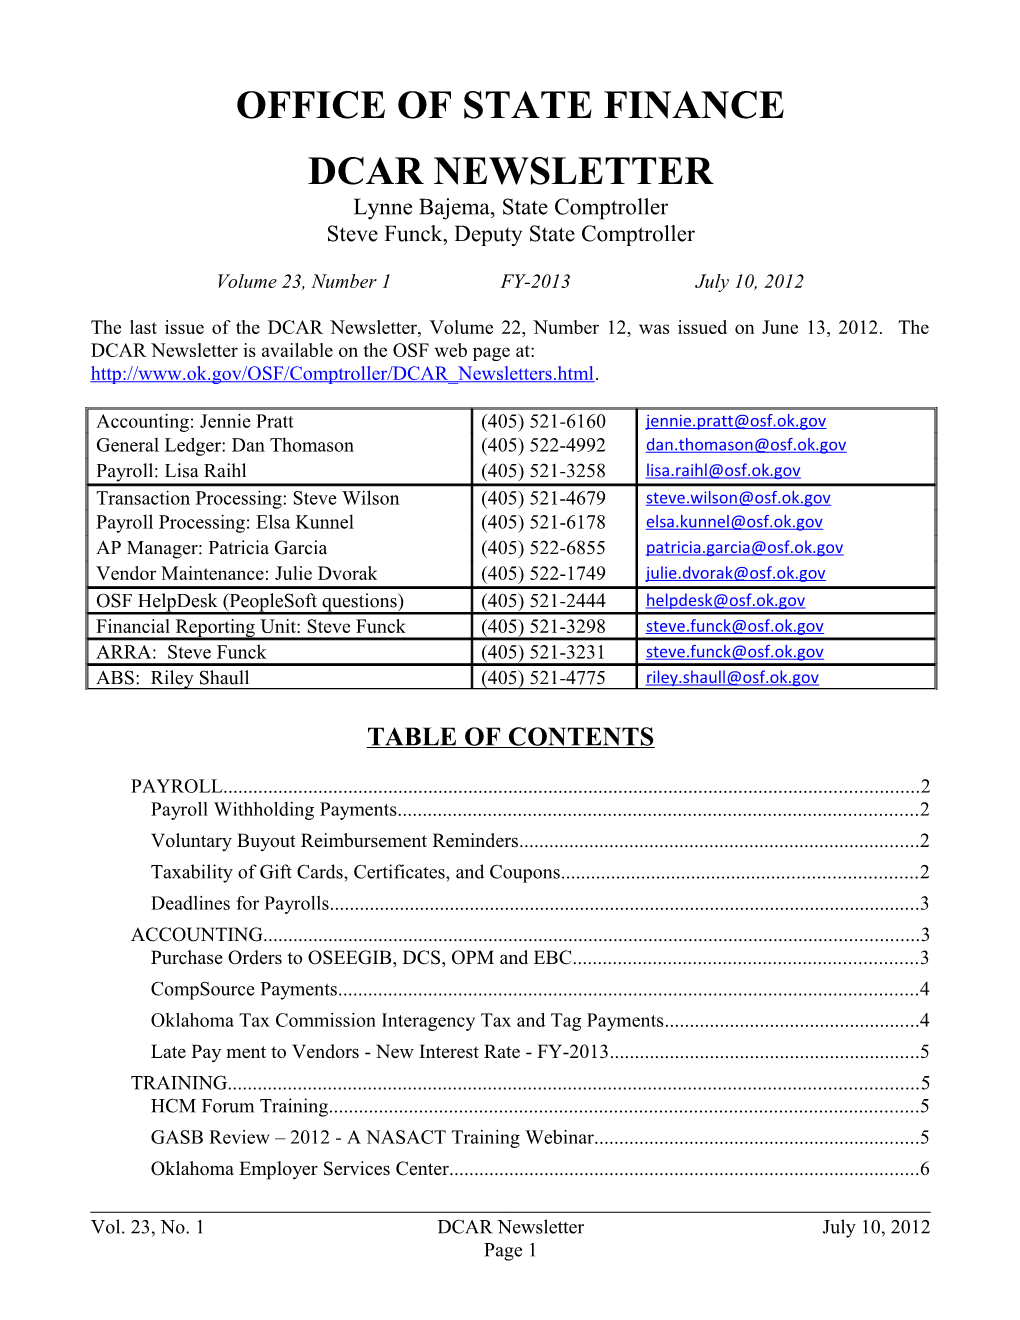 Office of State Finance DCAR Newsletter, July 10, 2012